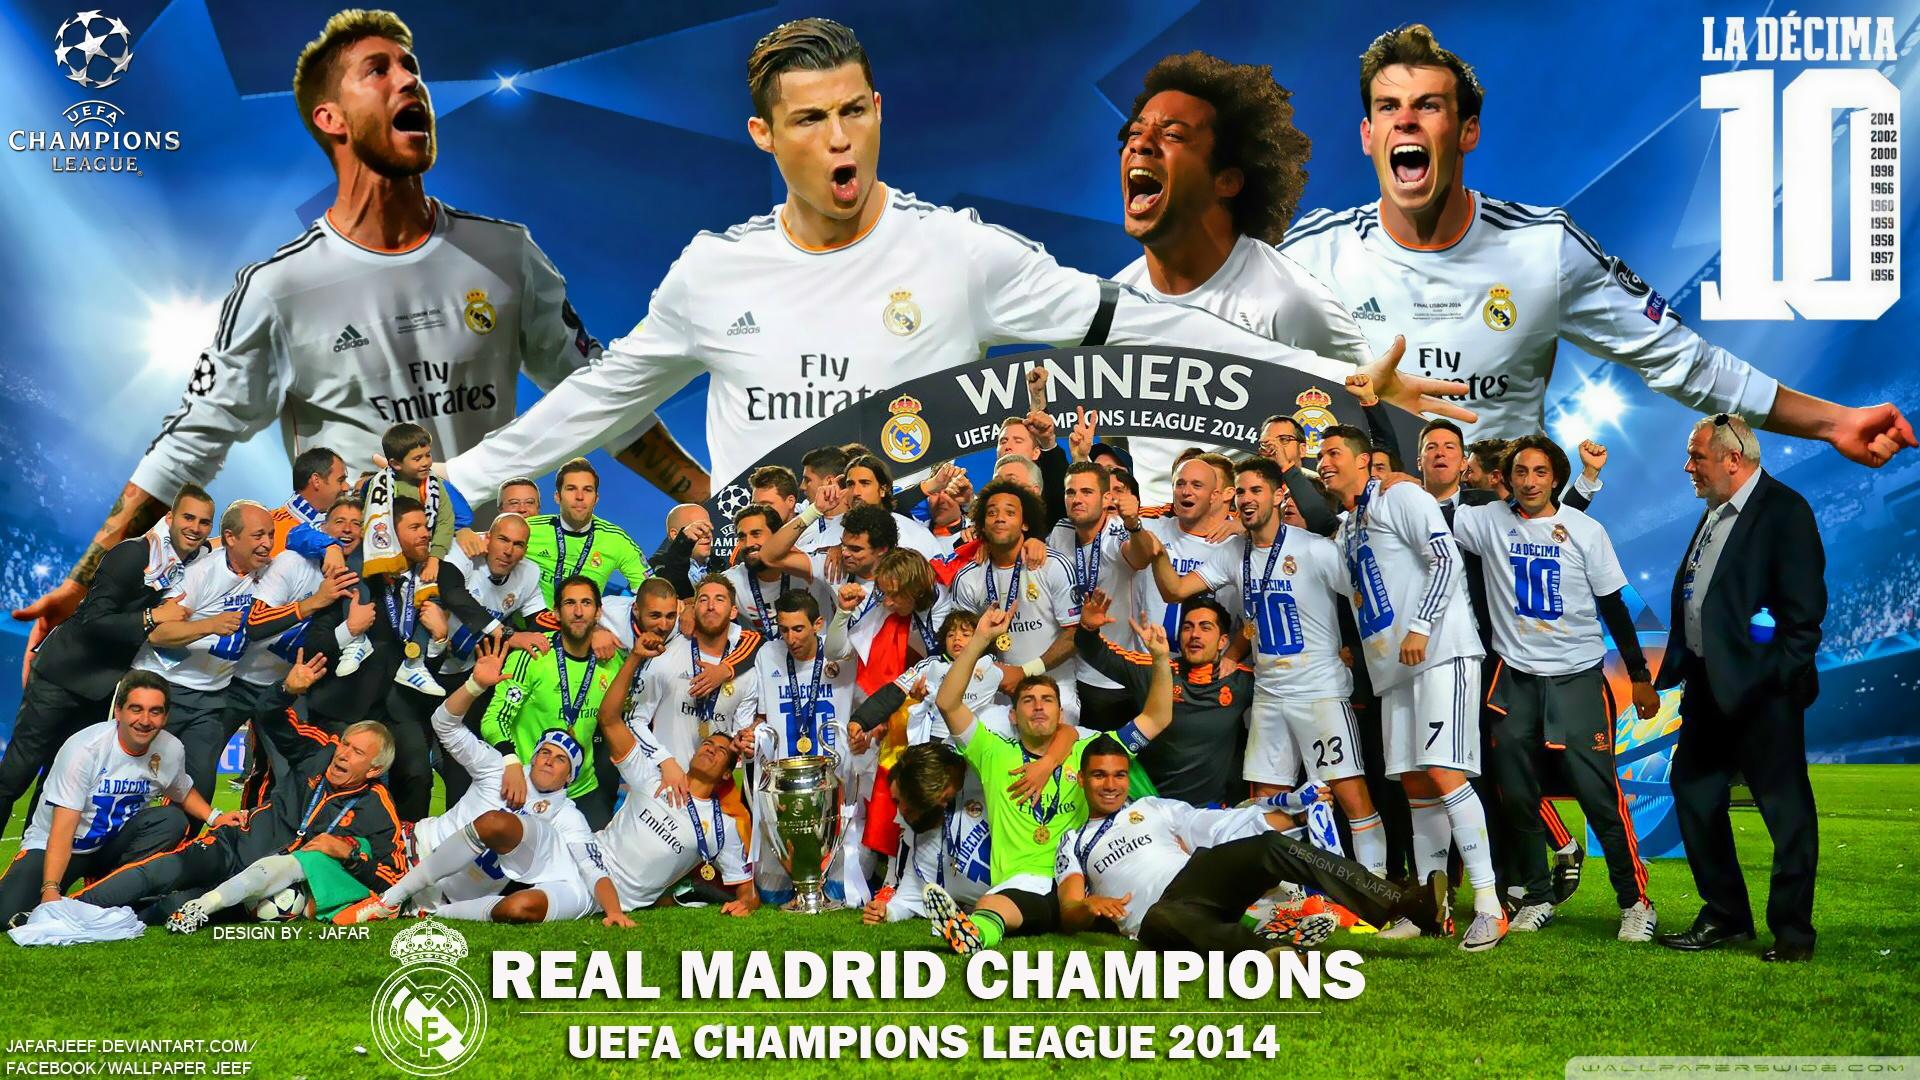 Free download New Real Madrid Winners Champions League 2014 Wallpaper Background [1920x1080] for your Desktop, Mobile & Tablet. Explore Real Madrid Wallpaper 2016. FC Barcelona Wallpaper HD Cristiano